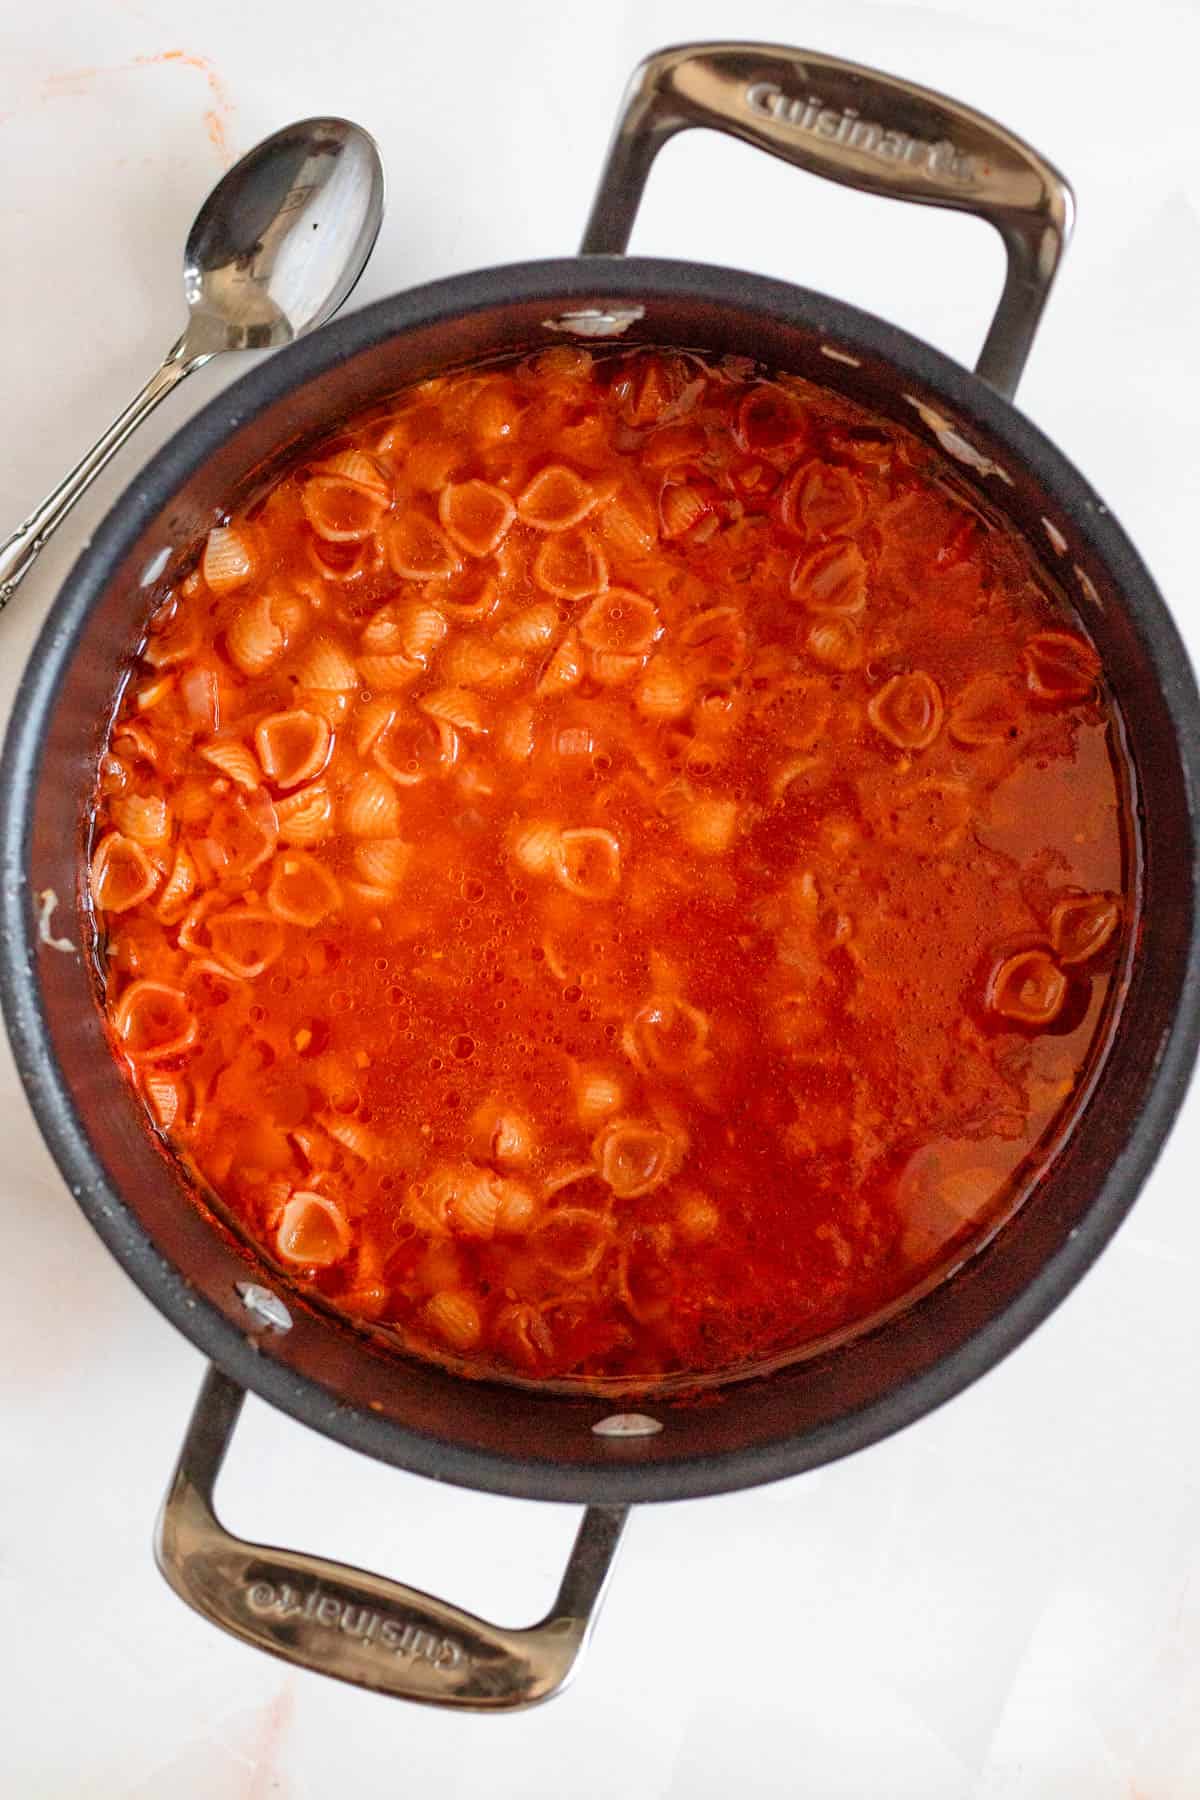 Sopa de conchitas with cooked shell pasta in a large black pot.